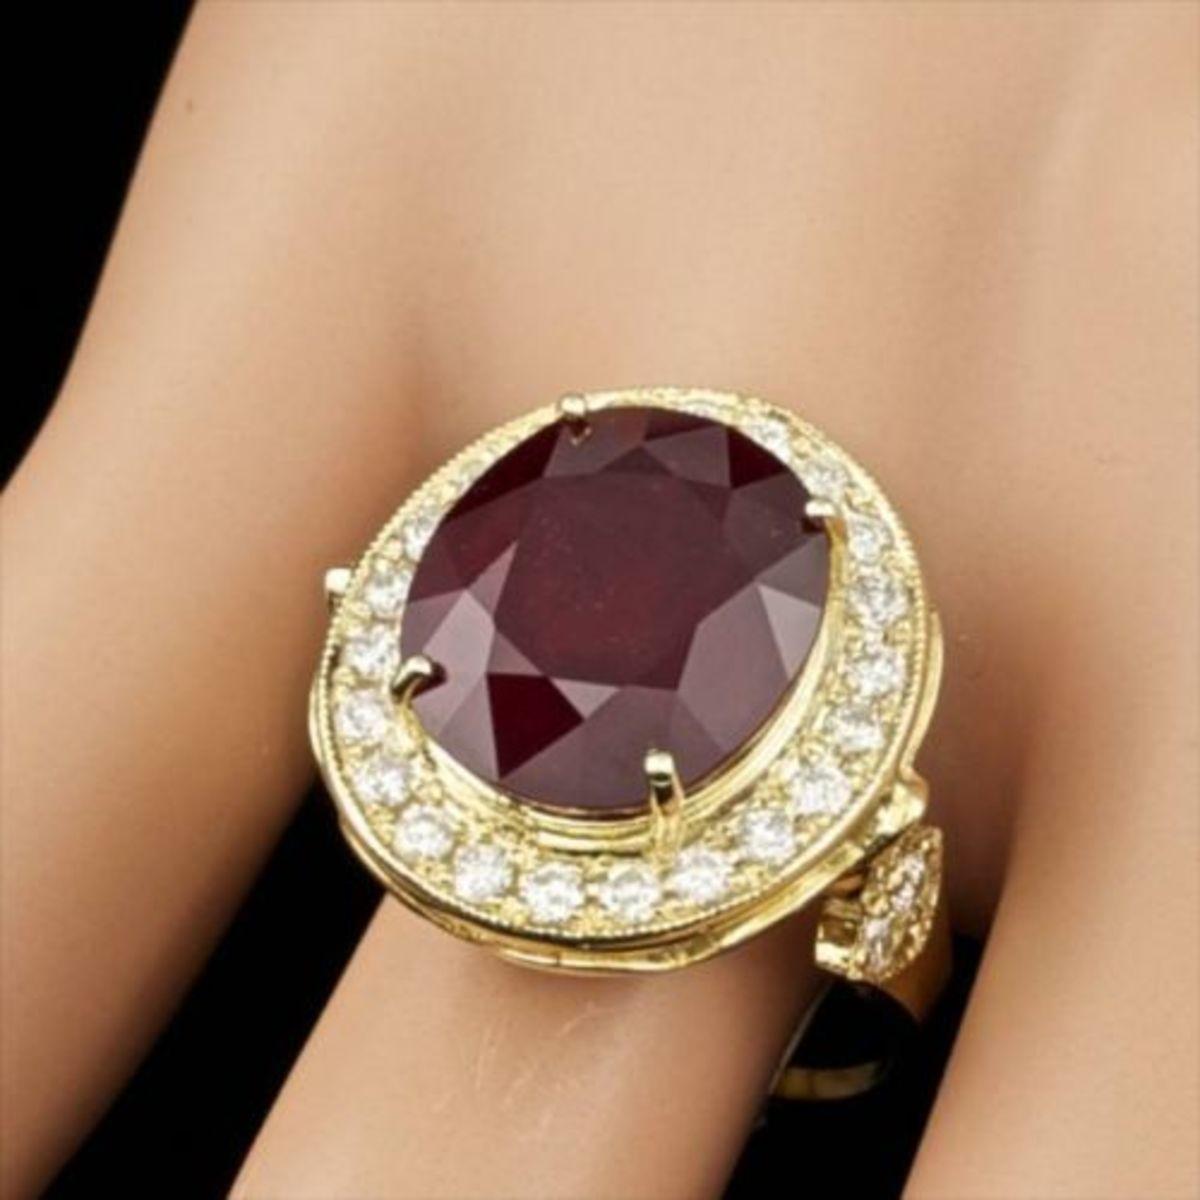 14K Yellow Gold 11.93ct Ruby and 0.97ct Diamond Ring